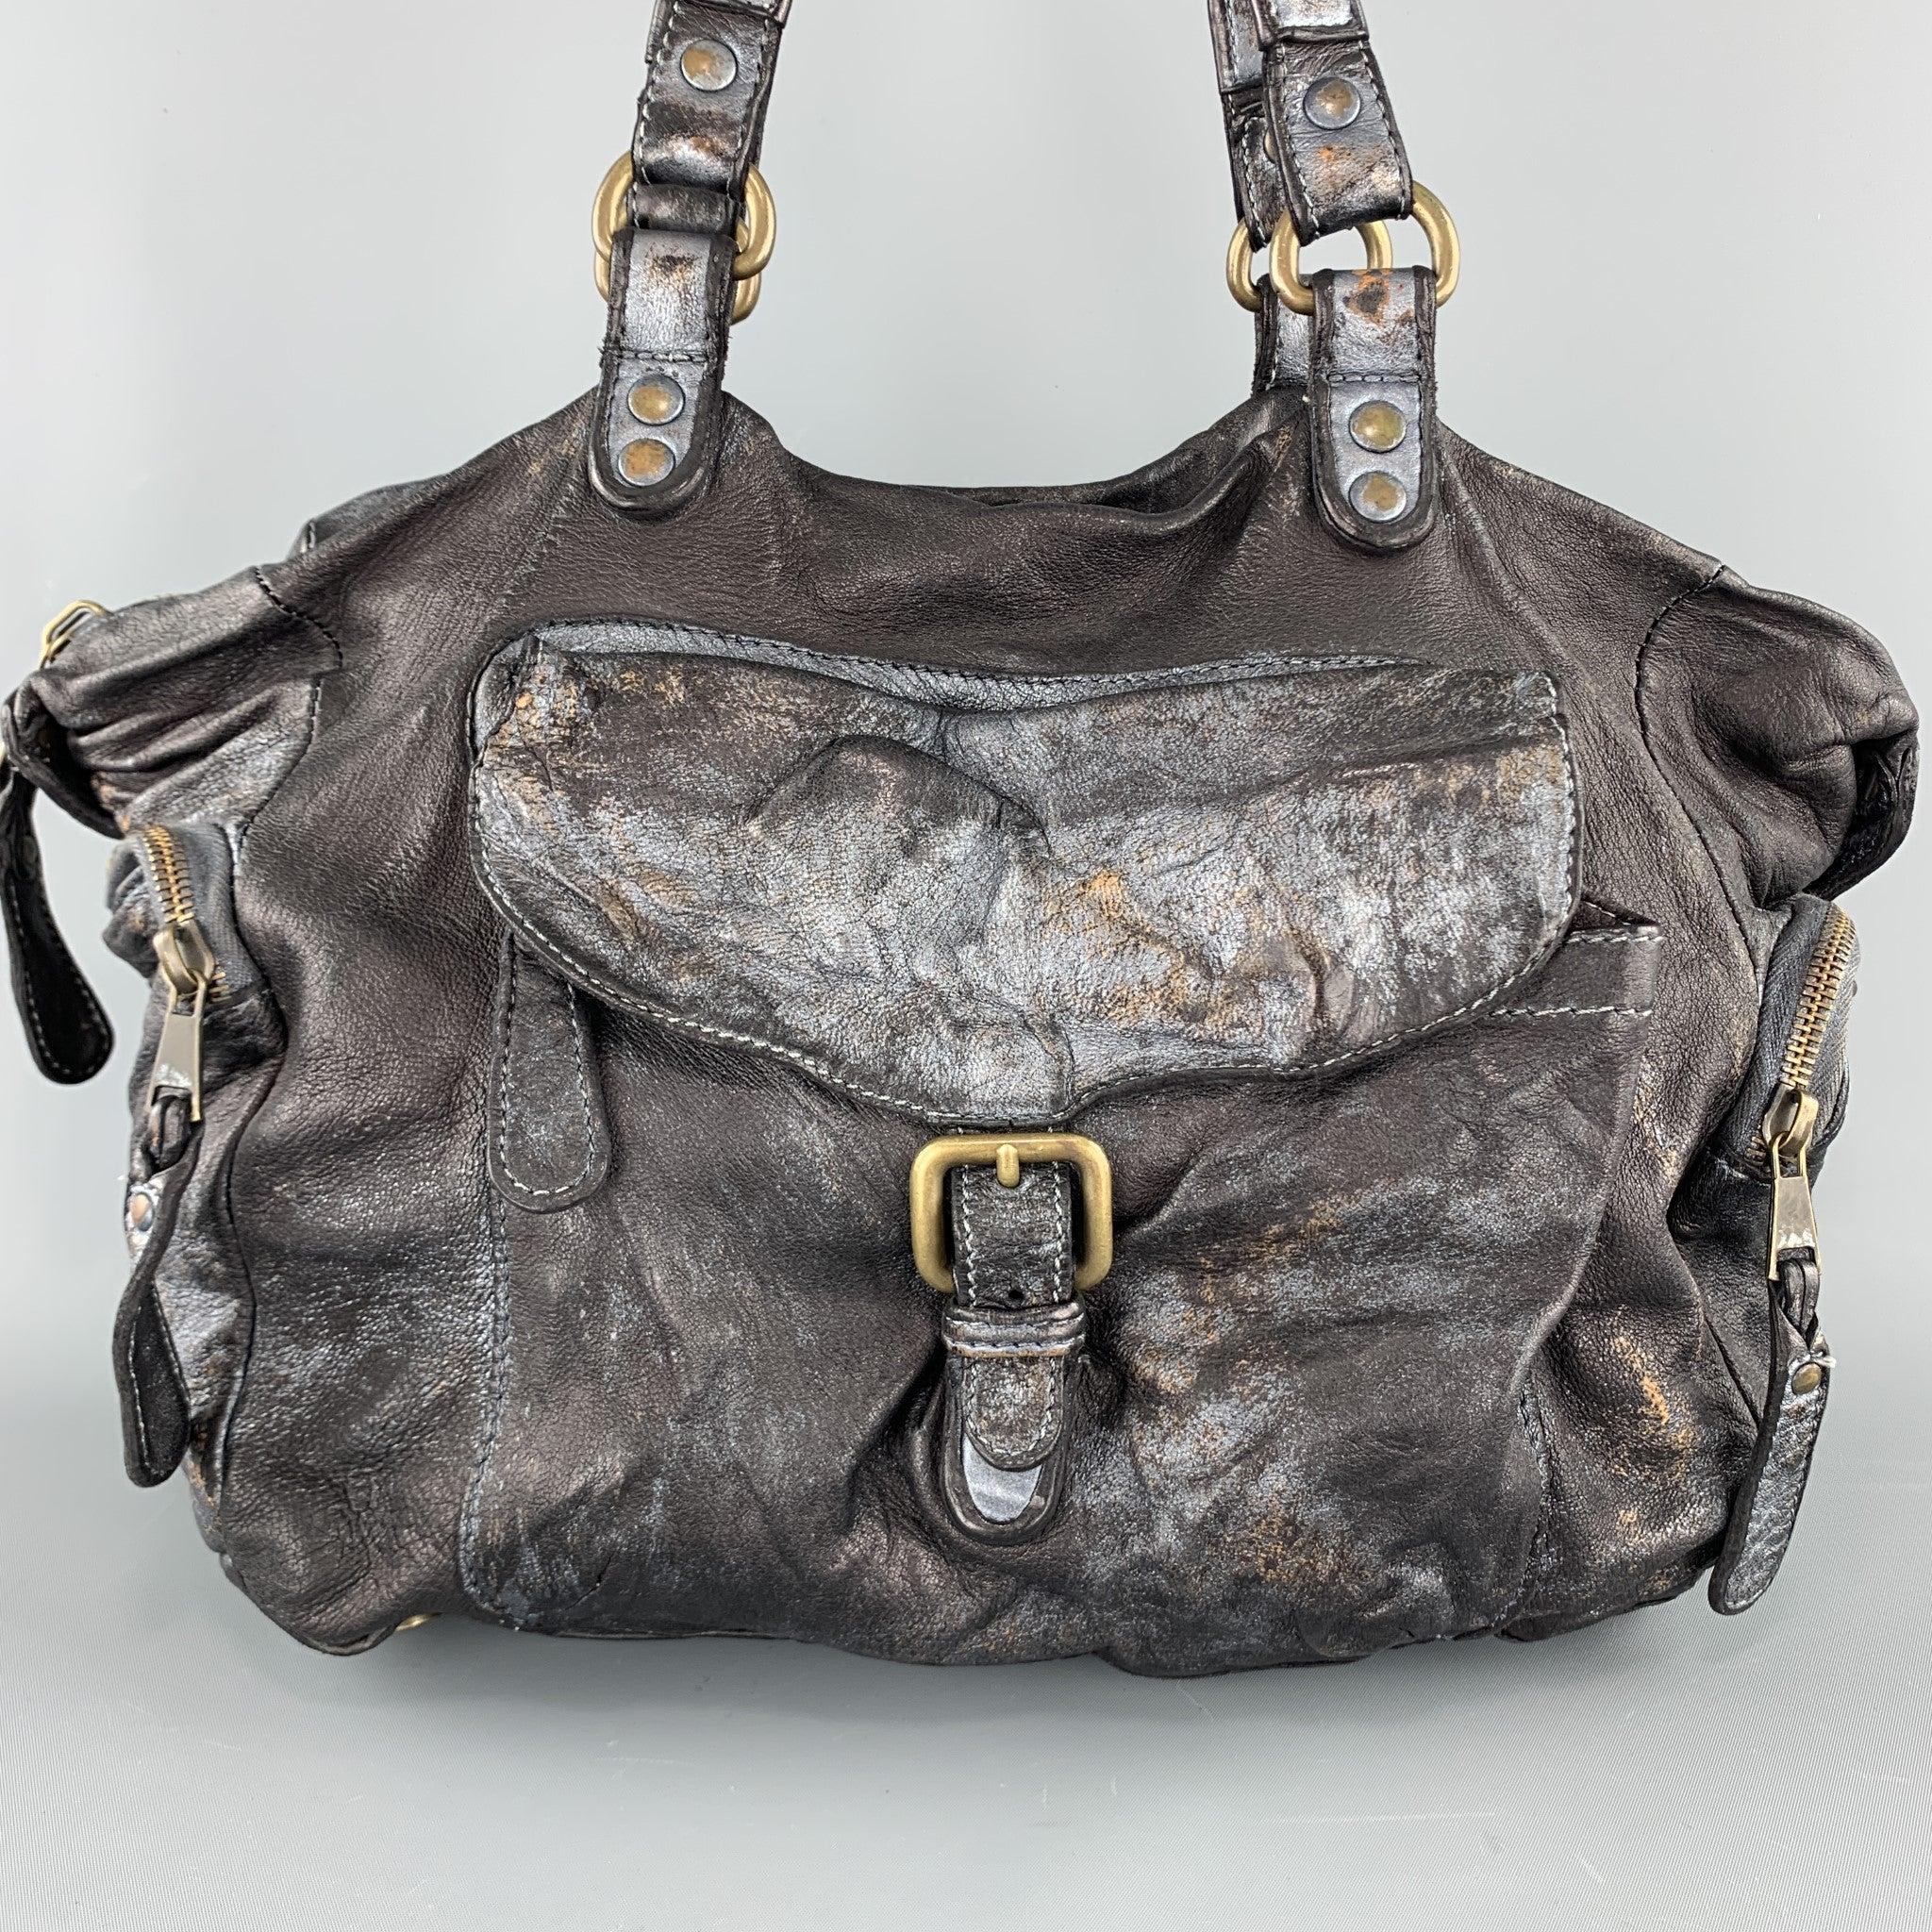 GIORGIO BRATO handbag comes in distressed charcoal leather with all over metallic qualities, zip pocket sides, flap buckled pocket front, double top straps, and top zip closure. With dust bag.
Very Good
Pre-Owned Condition. 

Measurements: 
 